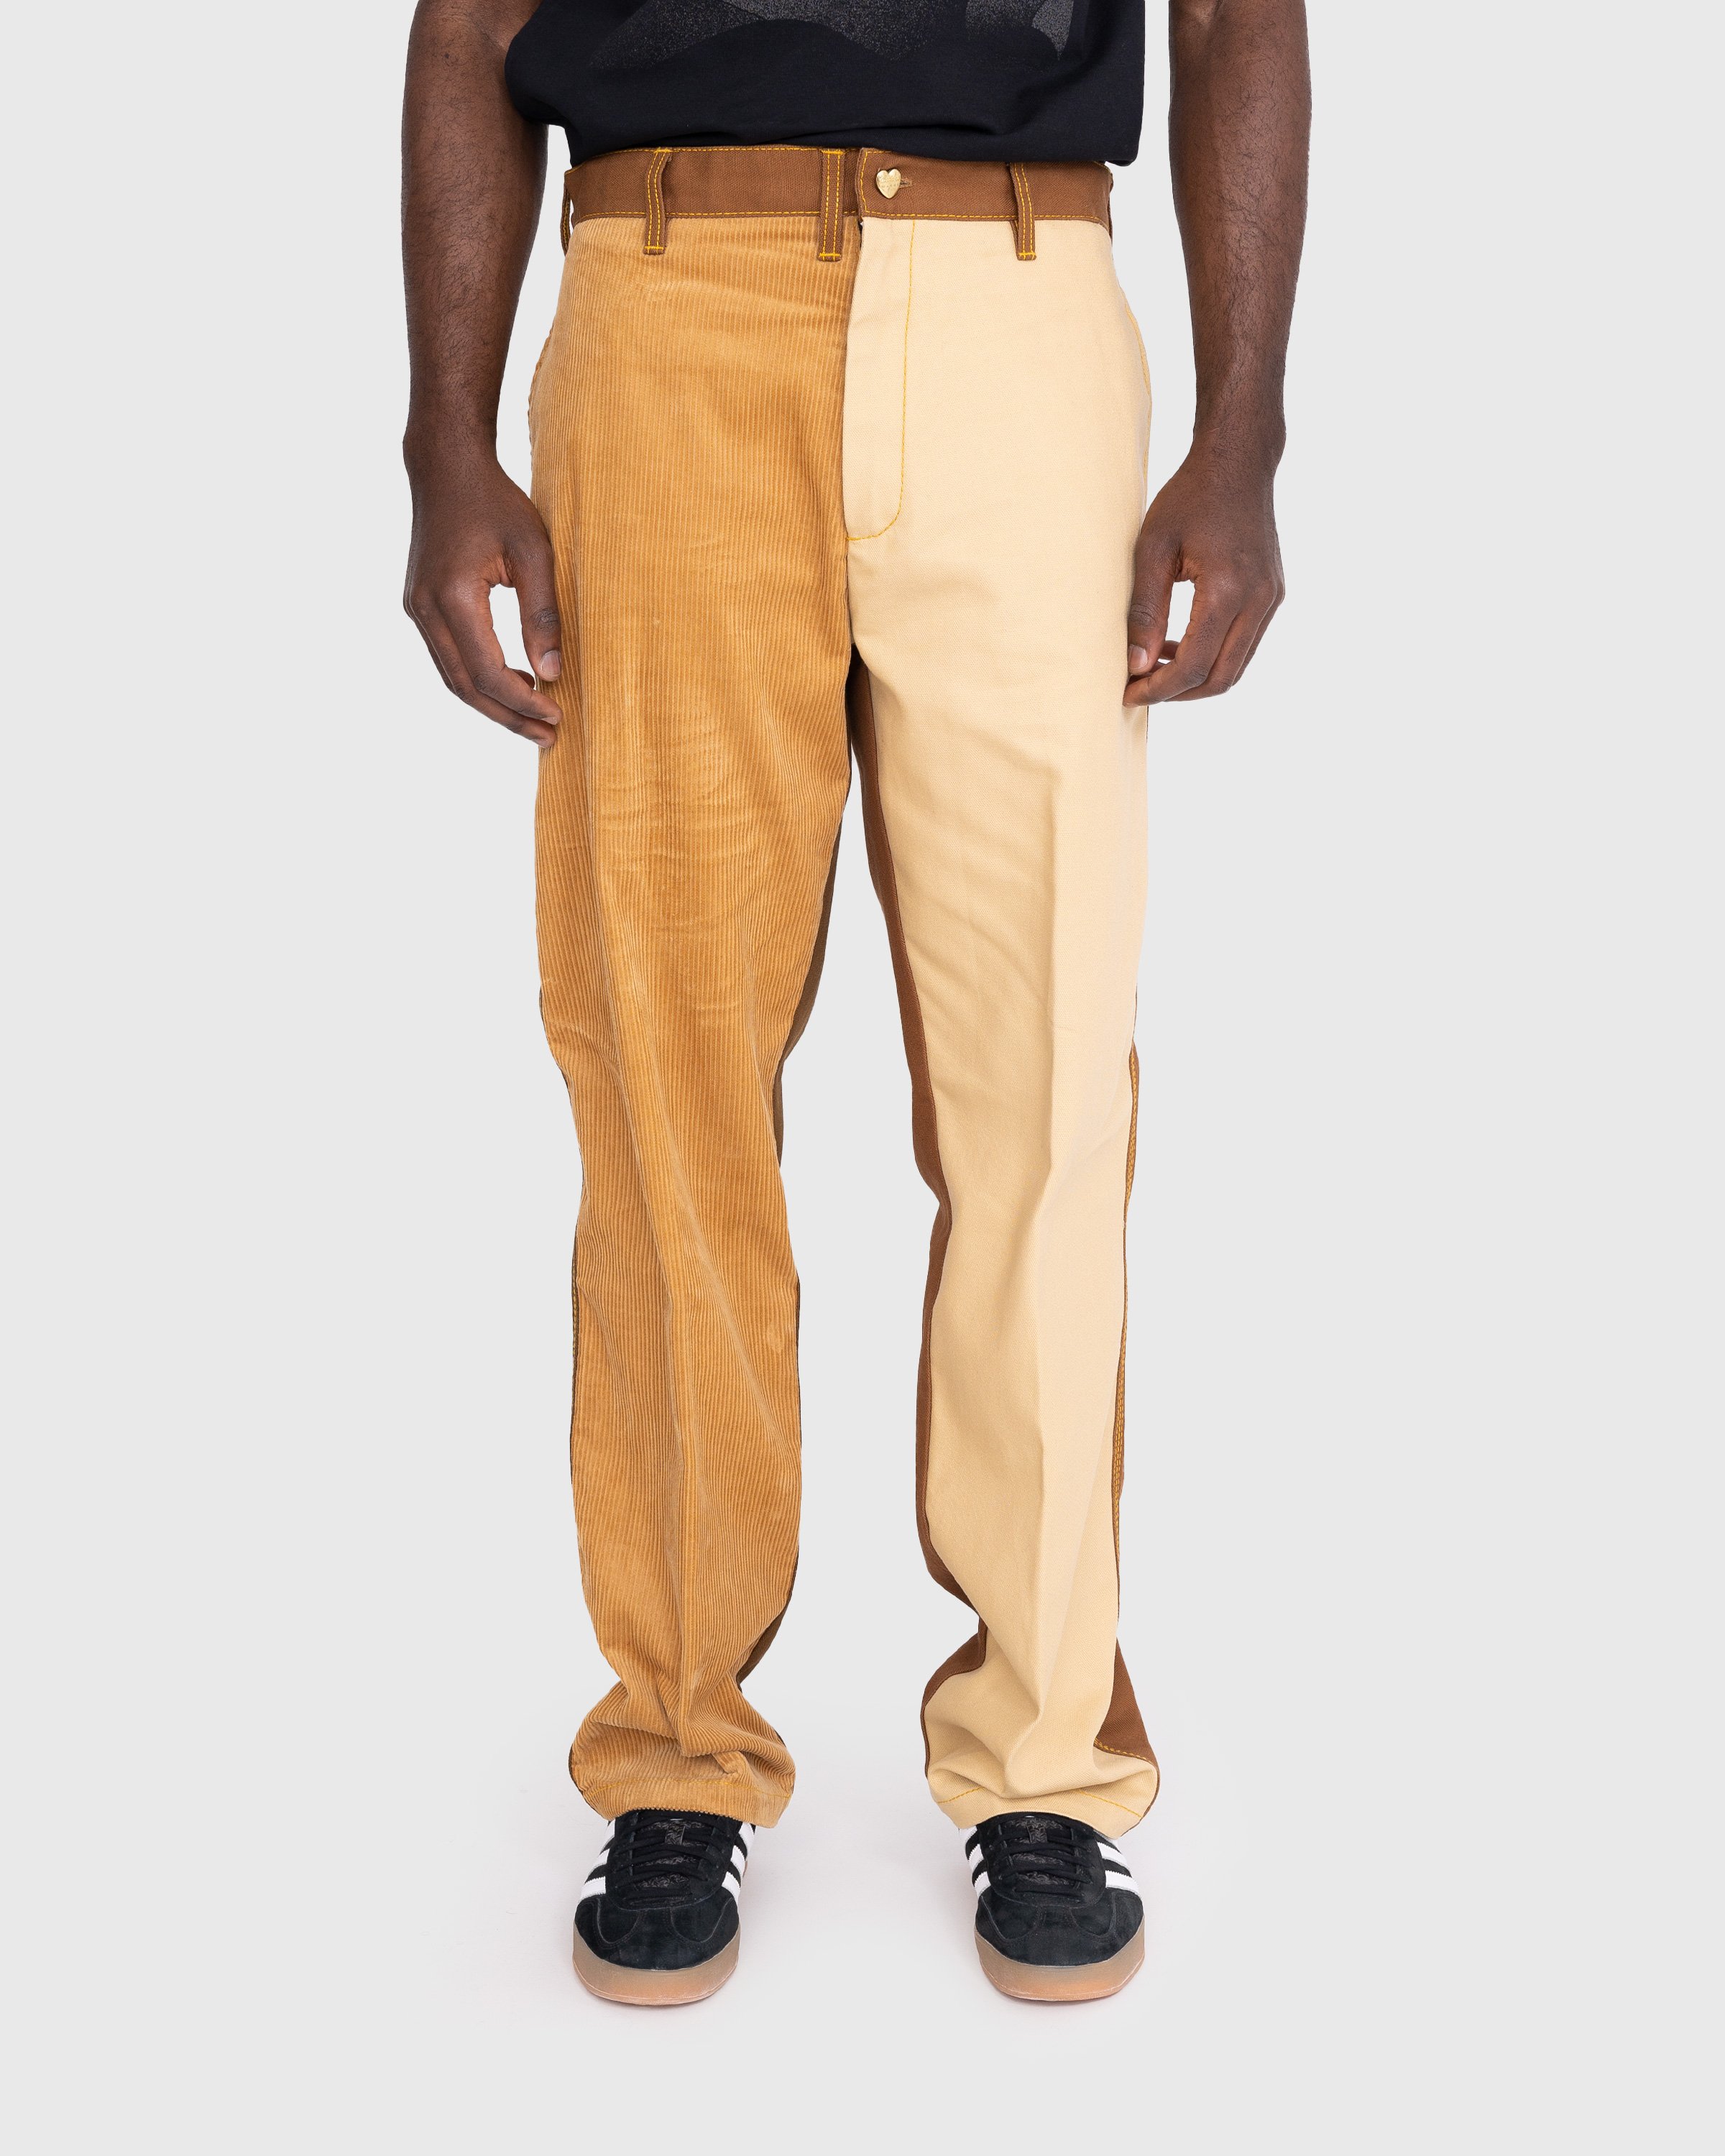 Marni x Carhartt WIP - Colorblocked Trousers Brown - Clothing - Brown - Image 2